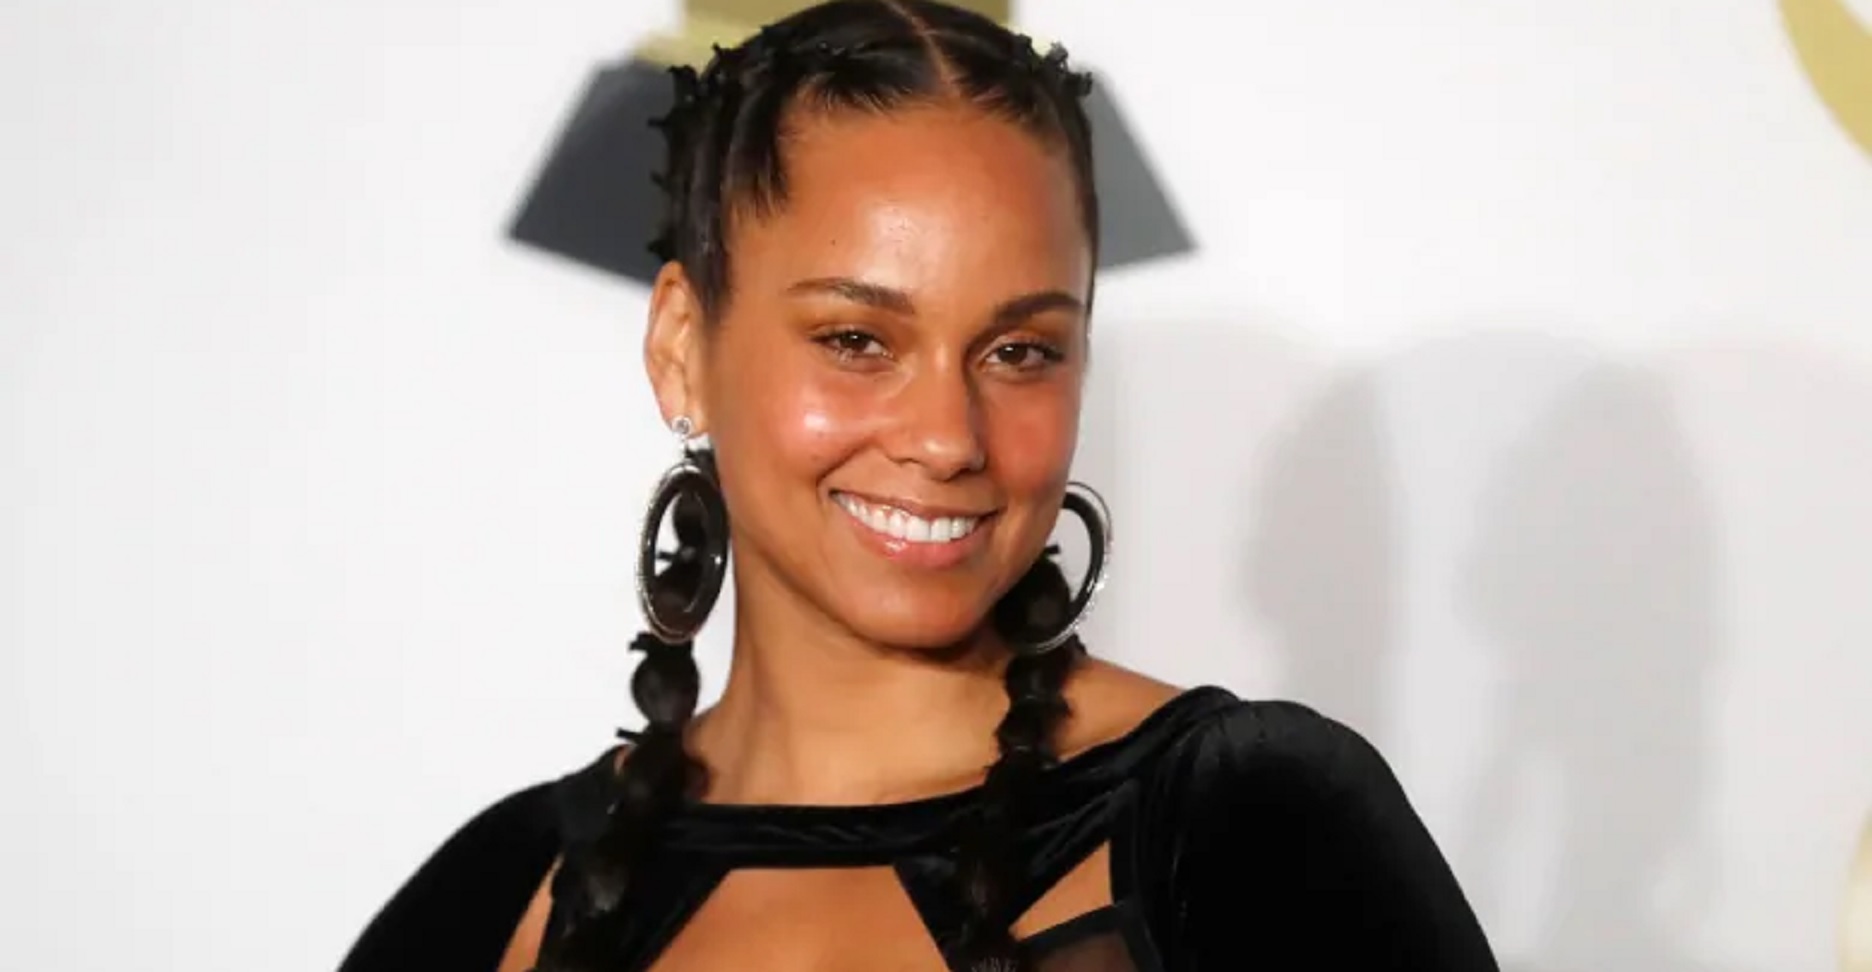 Listen To The Beautiful Acoustic Version Of Alicia Keys’ New Track ‘Underdog’